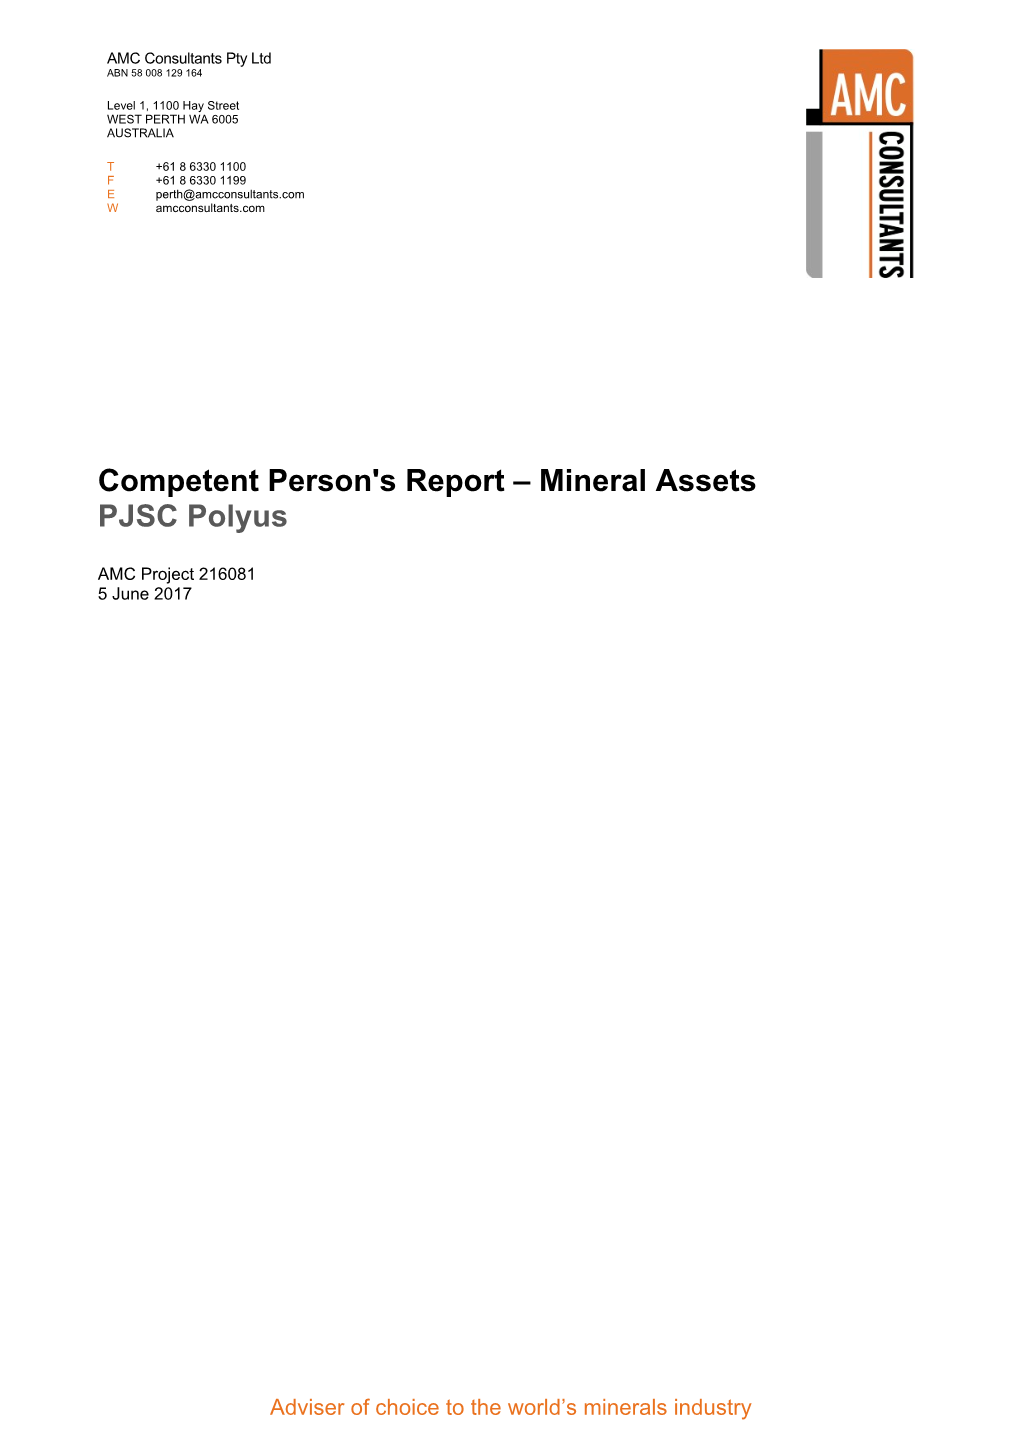 Competent Person's Report – Mineral Assets PJSC Polyus